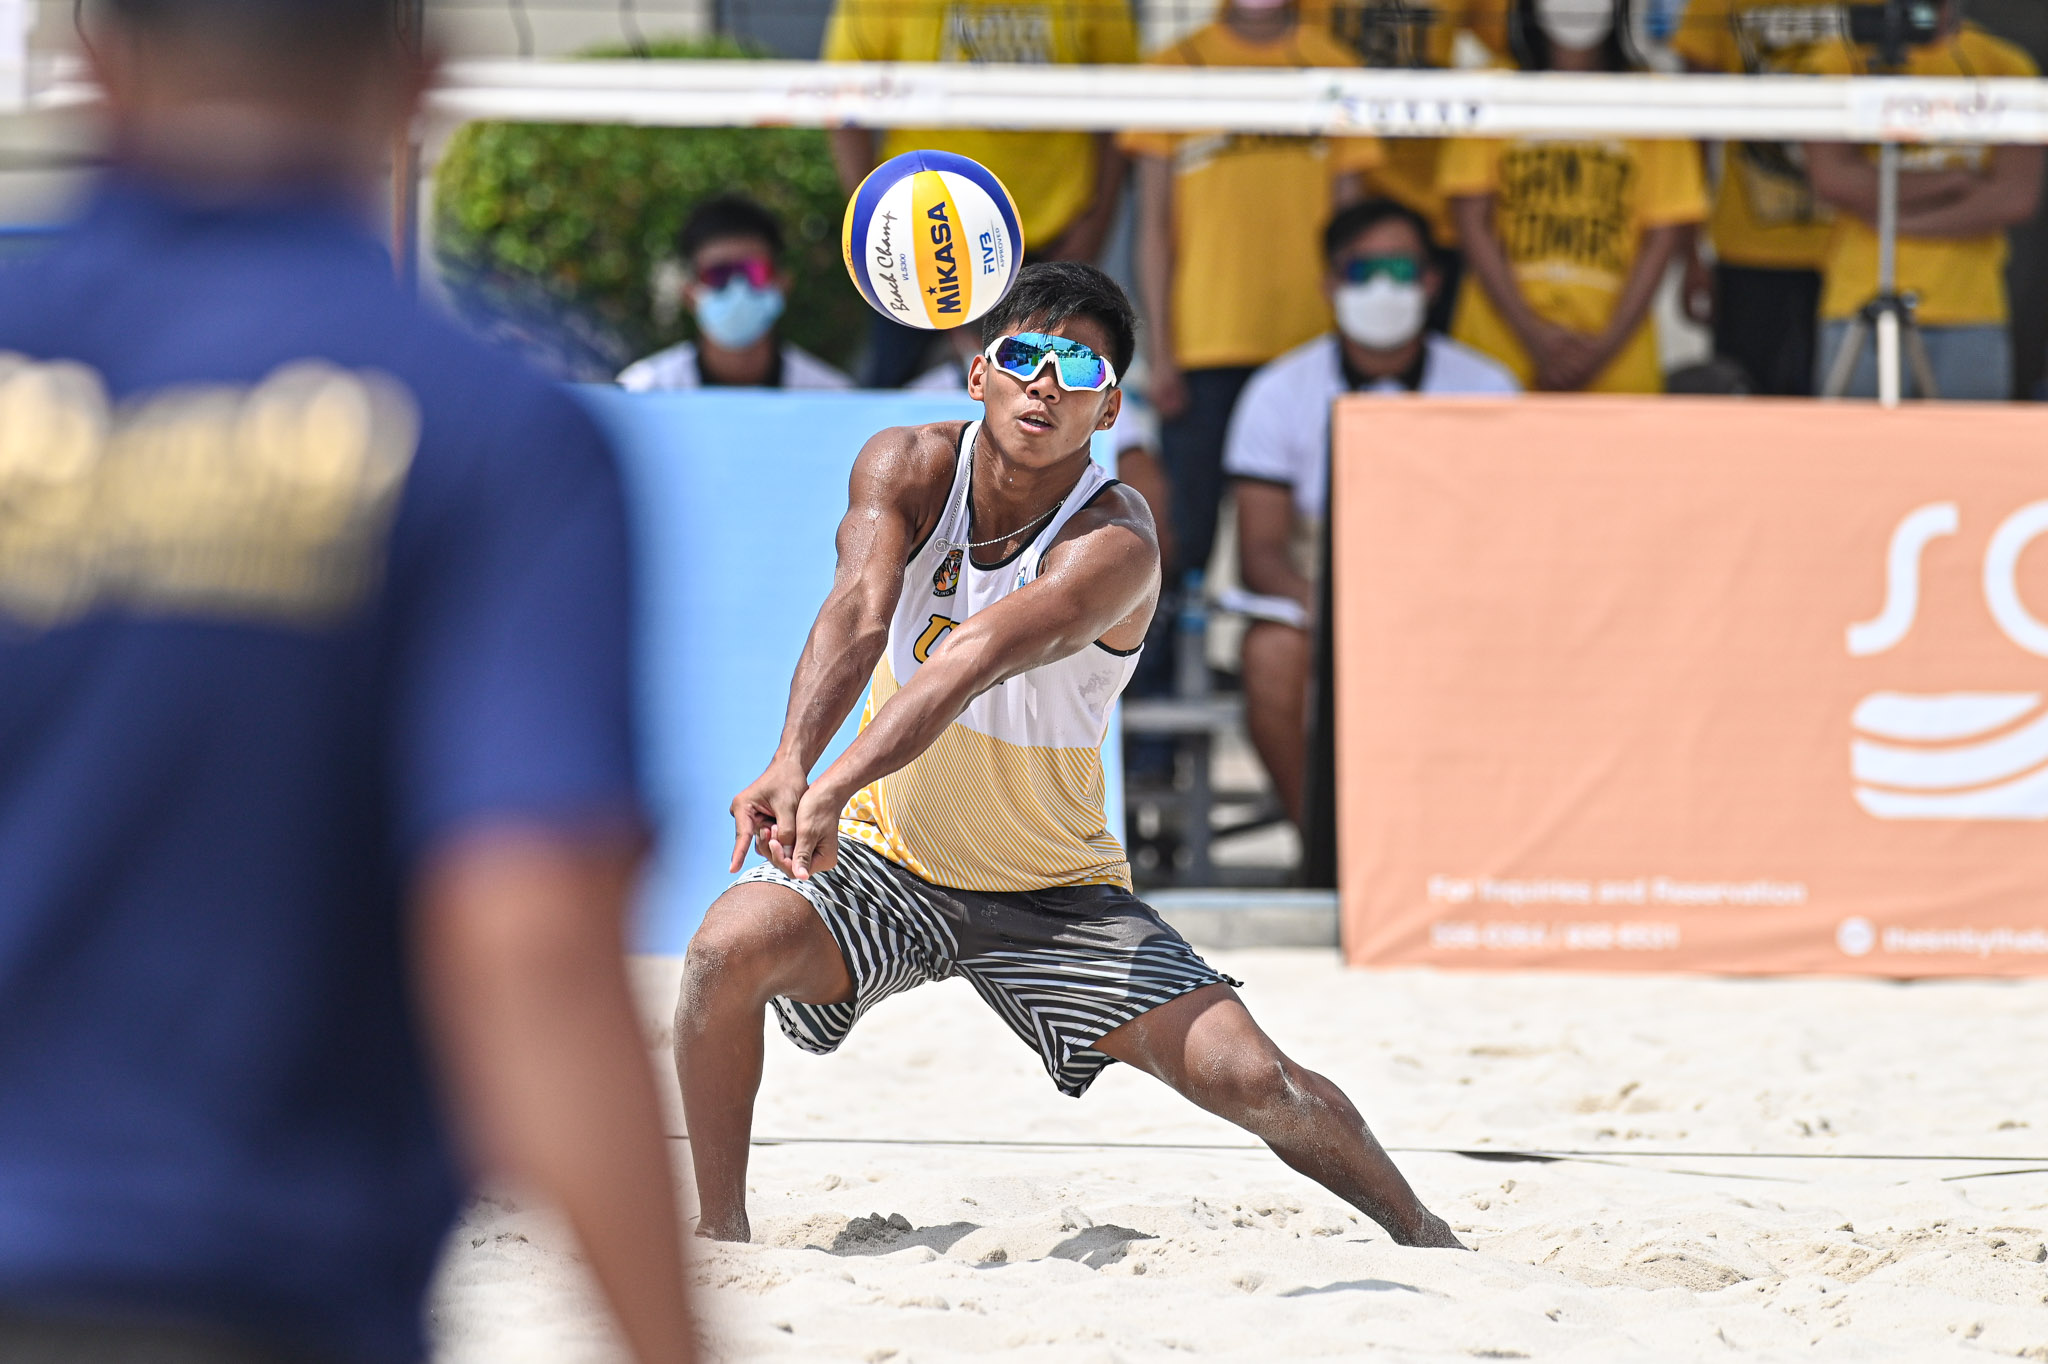 6th-Photo-Rancel-Varga-UST Rancel Varga admits he is still years away from making it to NT Beach Volleyball News UAAP UST  - philippine sports news